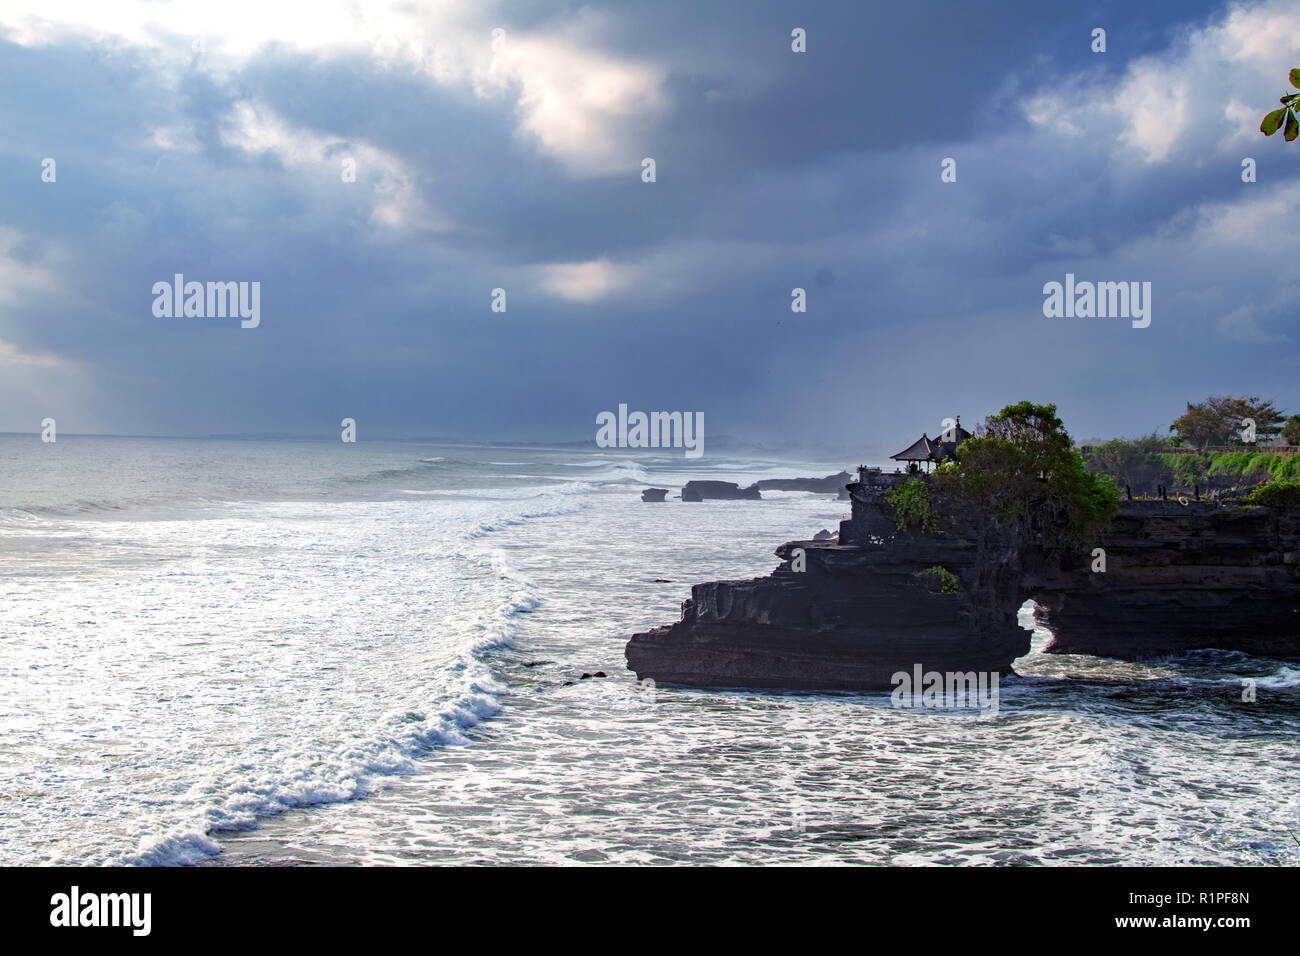 Chimeric temple on the water. Water temple in Bali. Indonesia nature landscape. Famous Bali landmark. Splashing waves and stone. Cloudy day in Indonesia. Water and rocks before storm Stock Photo